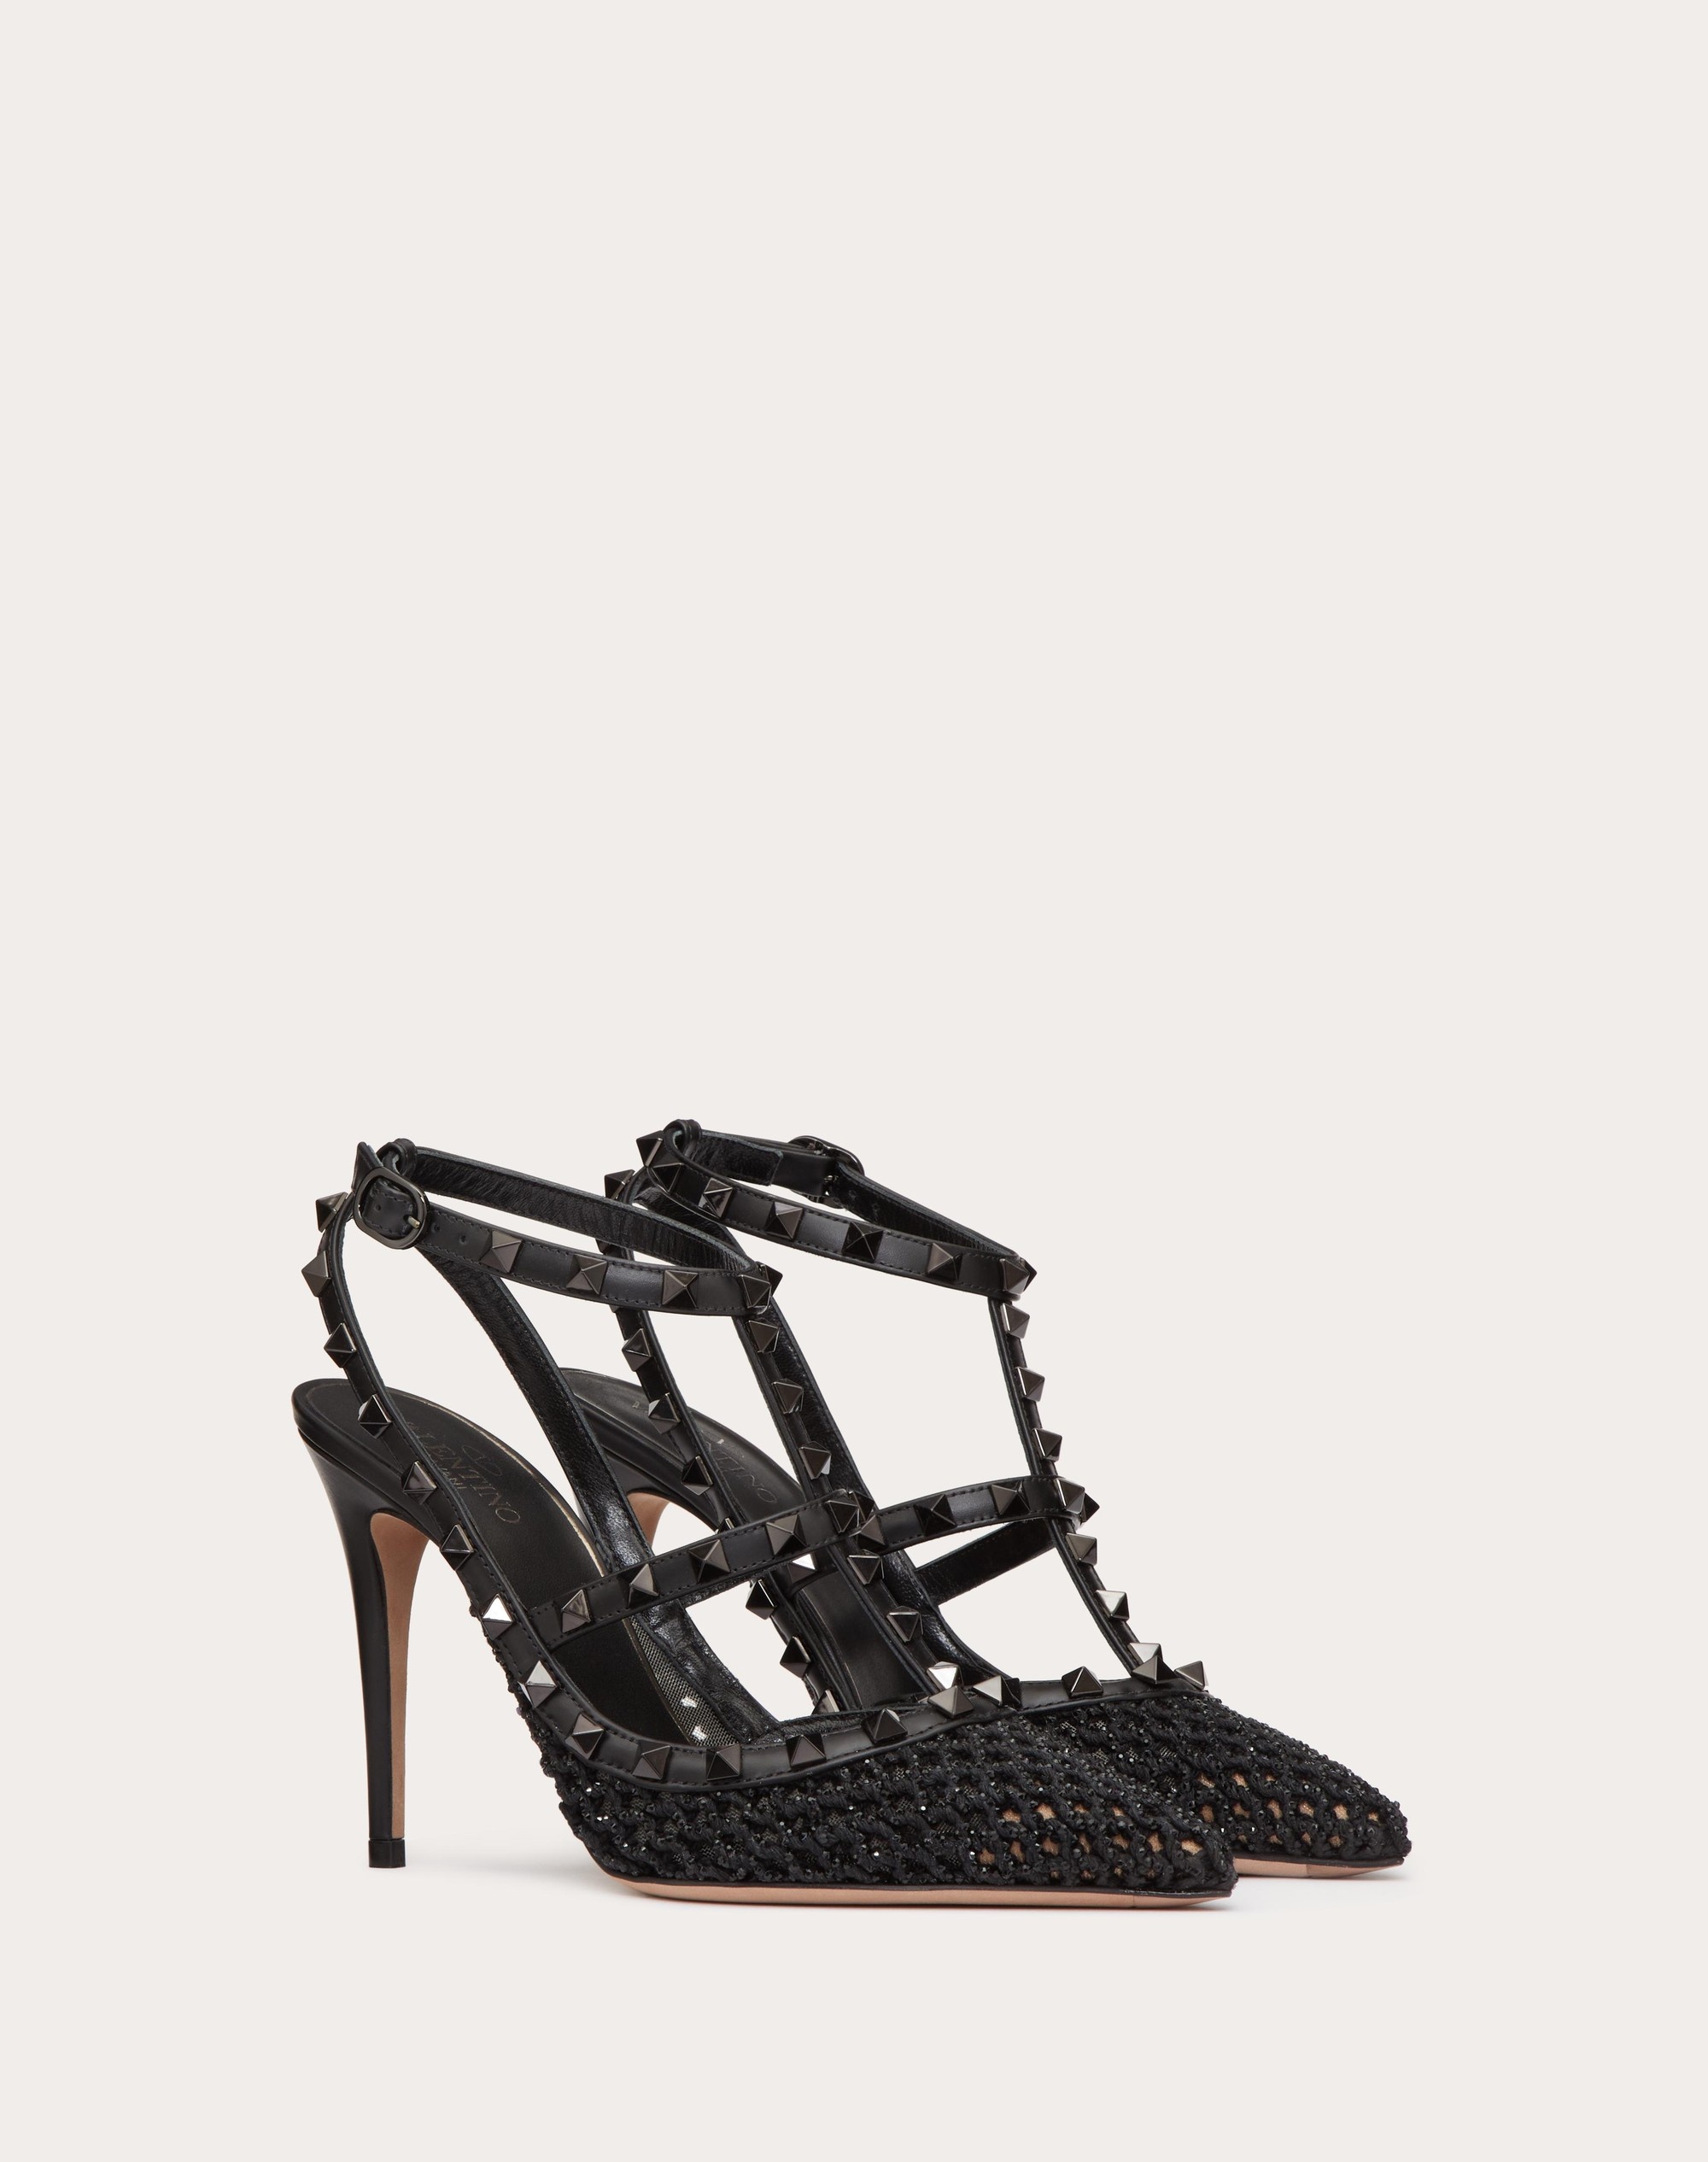 ROCKSTUD MESH PUMP WITH CRYSTALS AND STRAPS 100MM - 2